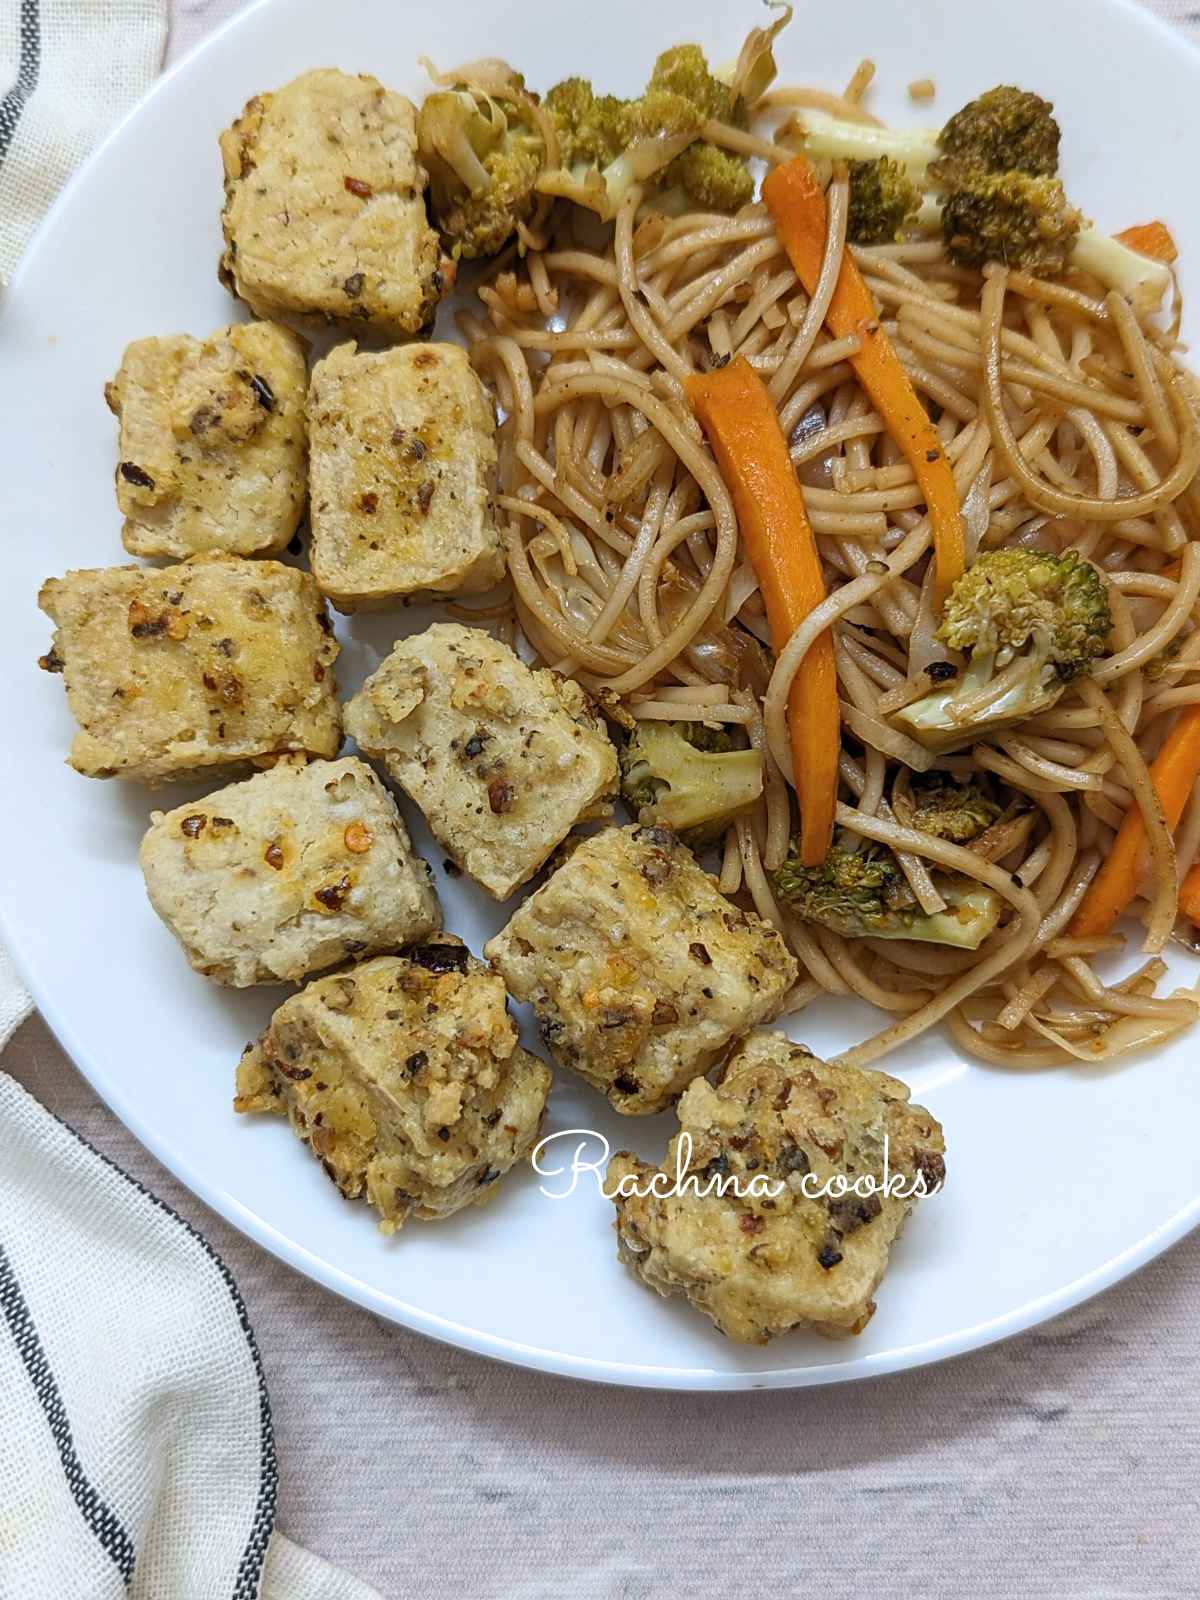 Salt and pepper tofu served with noodles.